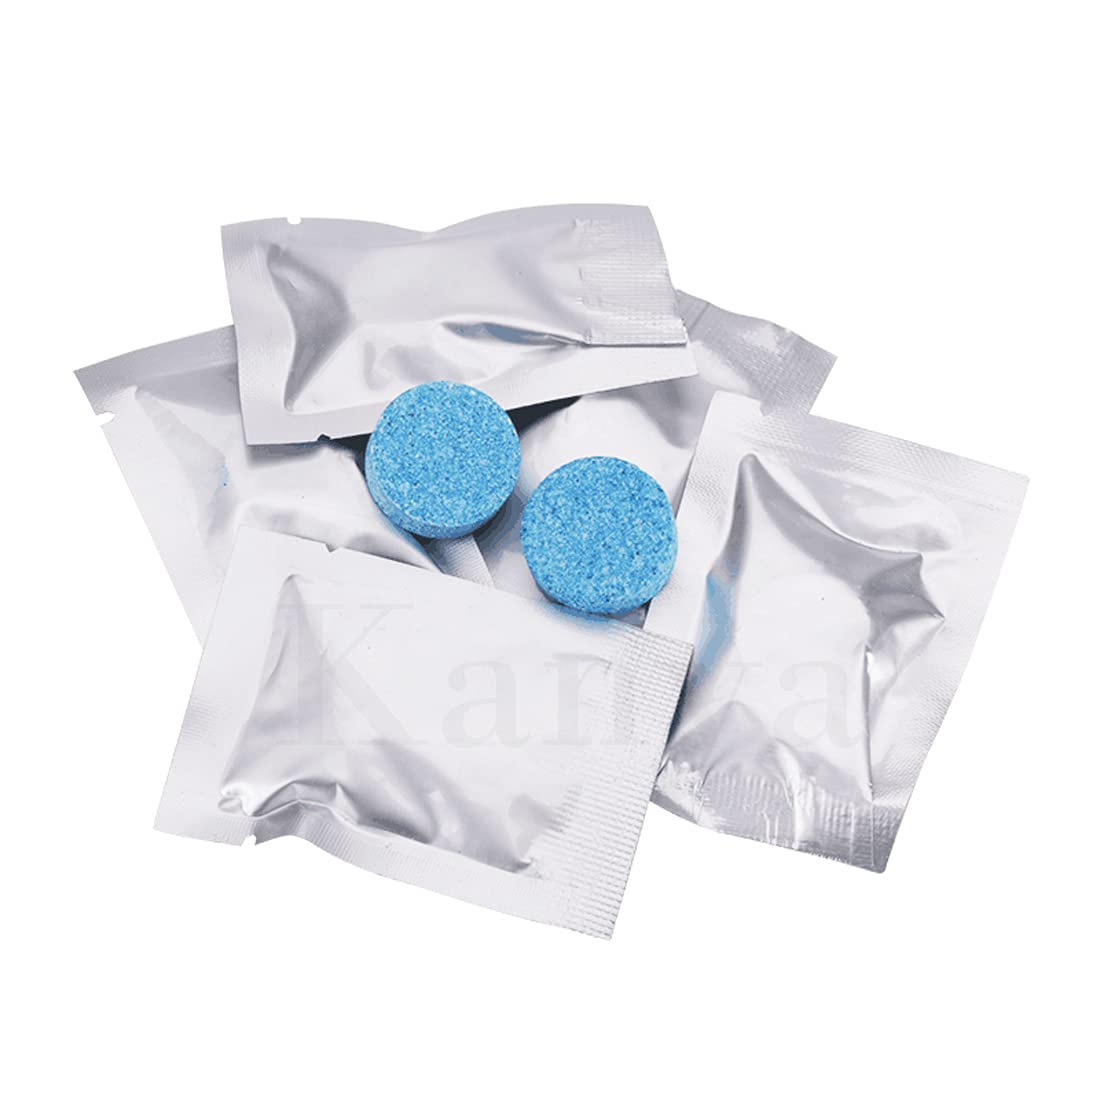 Car Windshield Cleaning Tablet